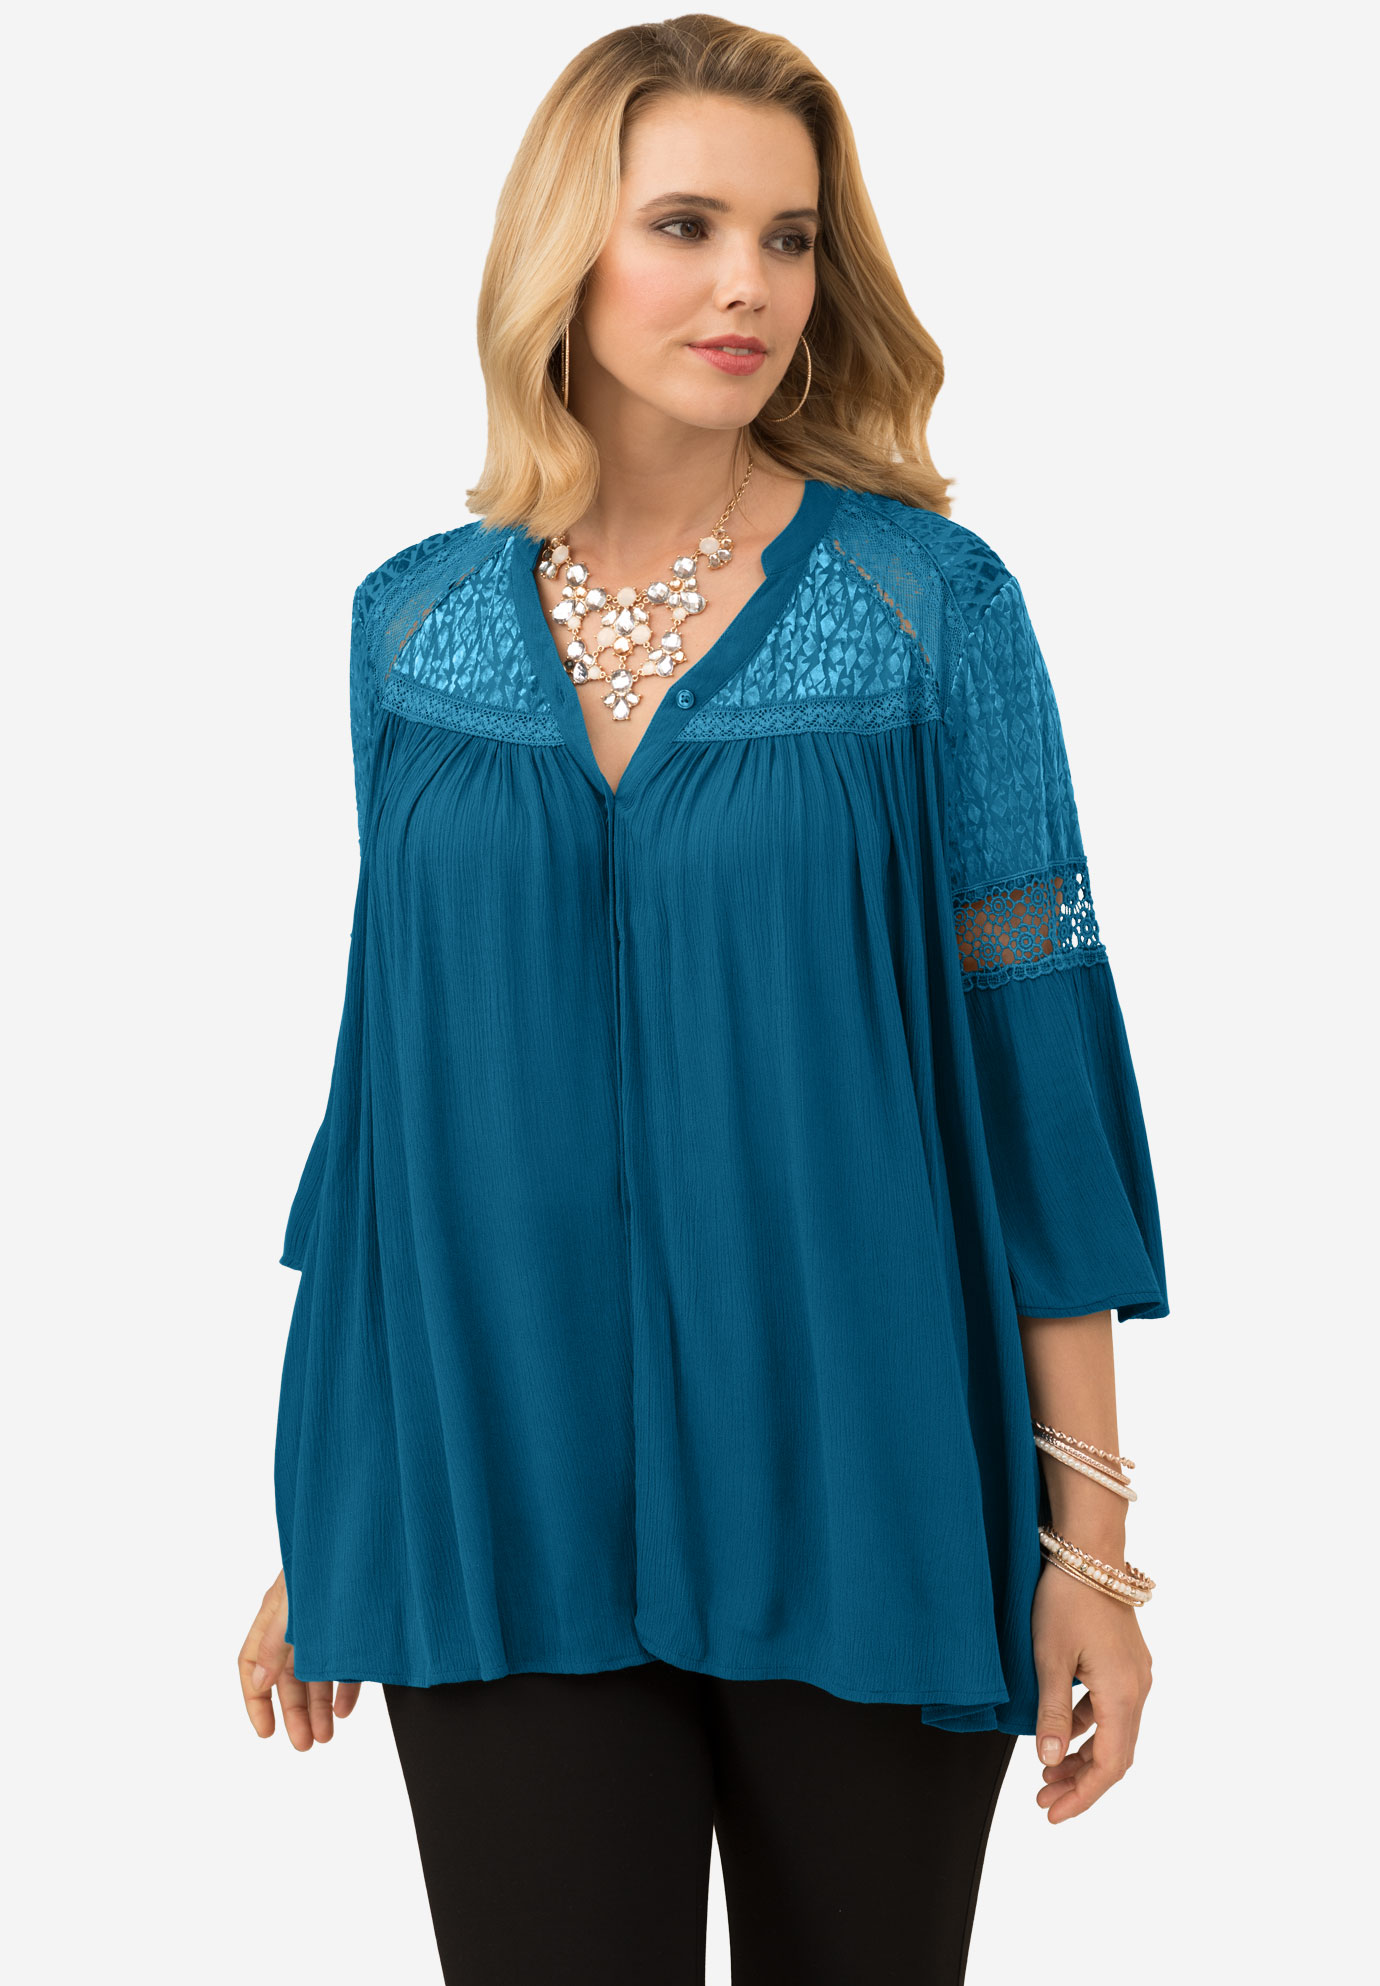 Crinkle Top With Velvet & Lace| Plus Size Tops | Roaman's